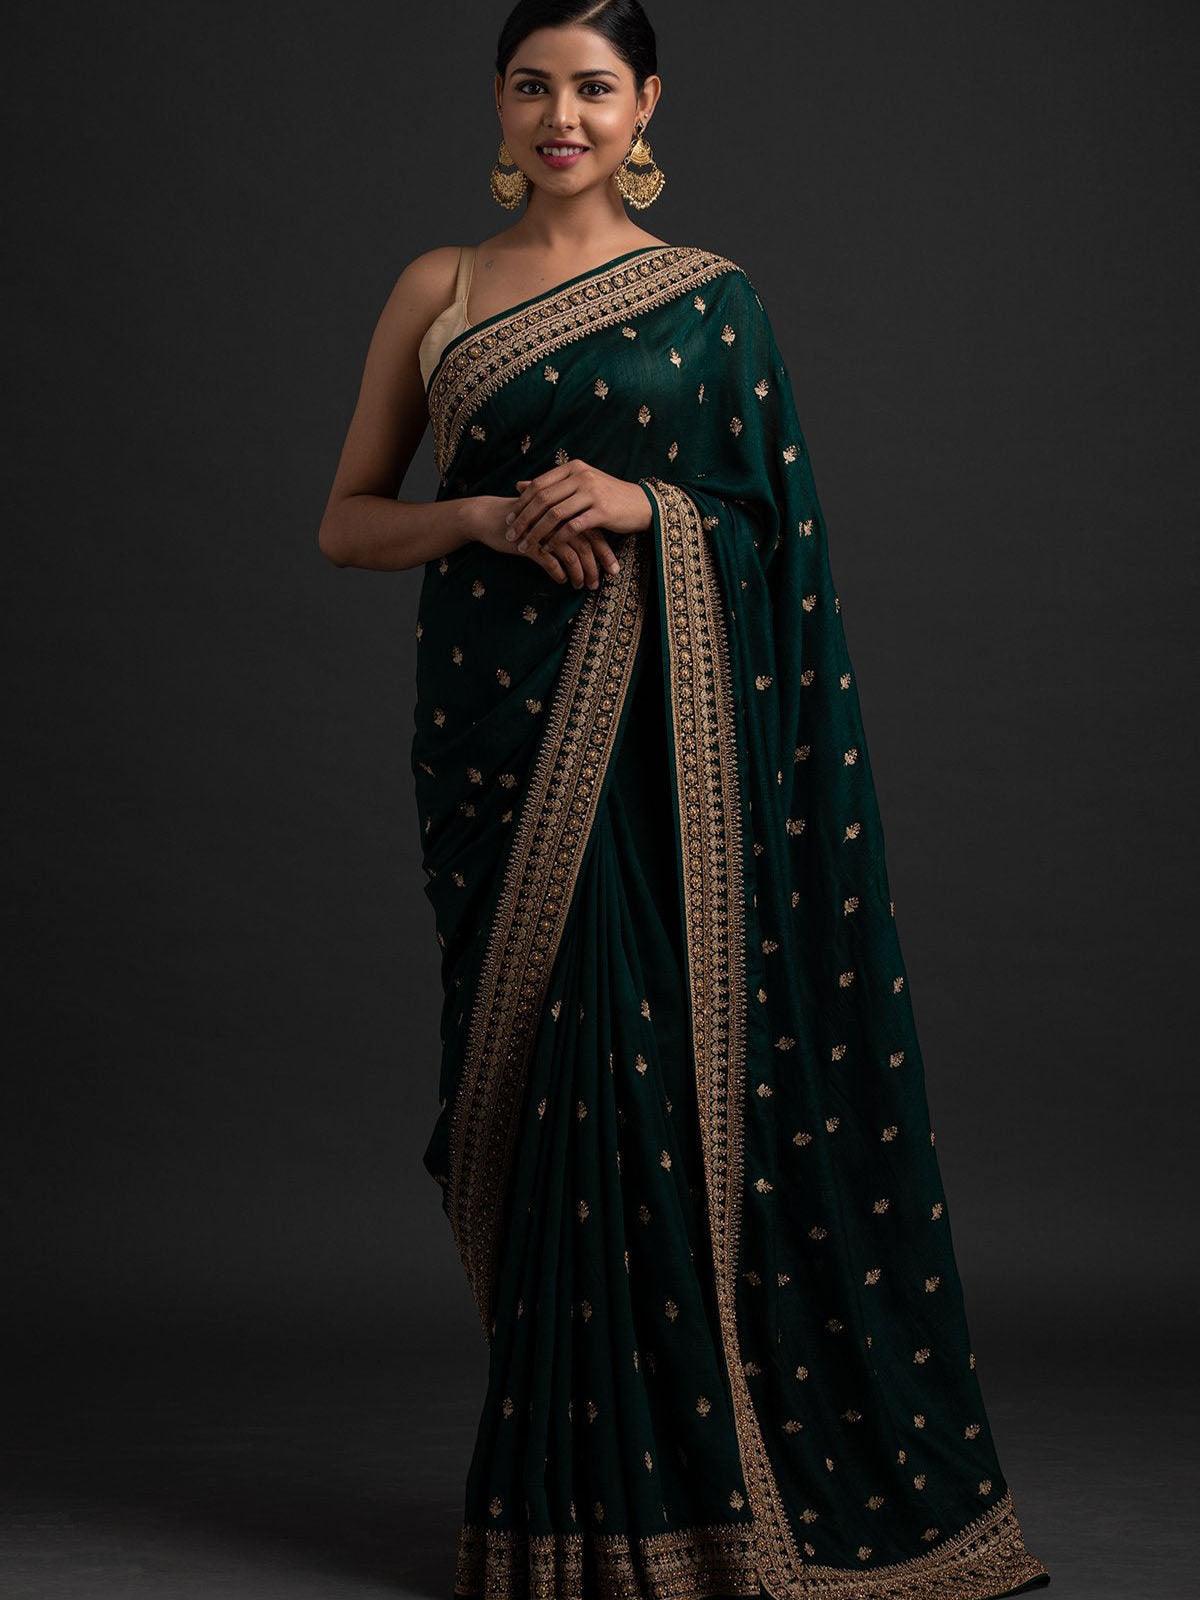 Women's Green Beautifully Embroidered Wedding Saree - Odette